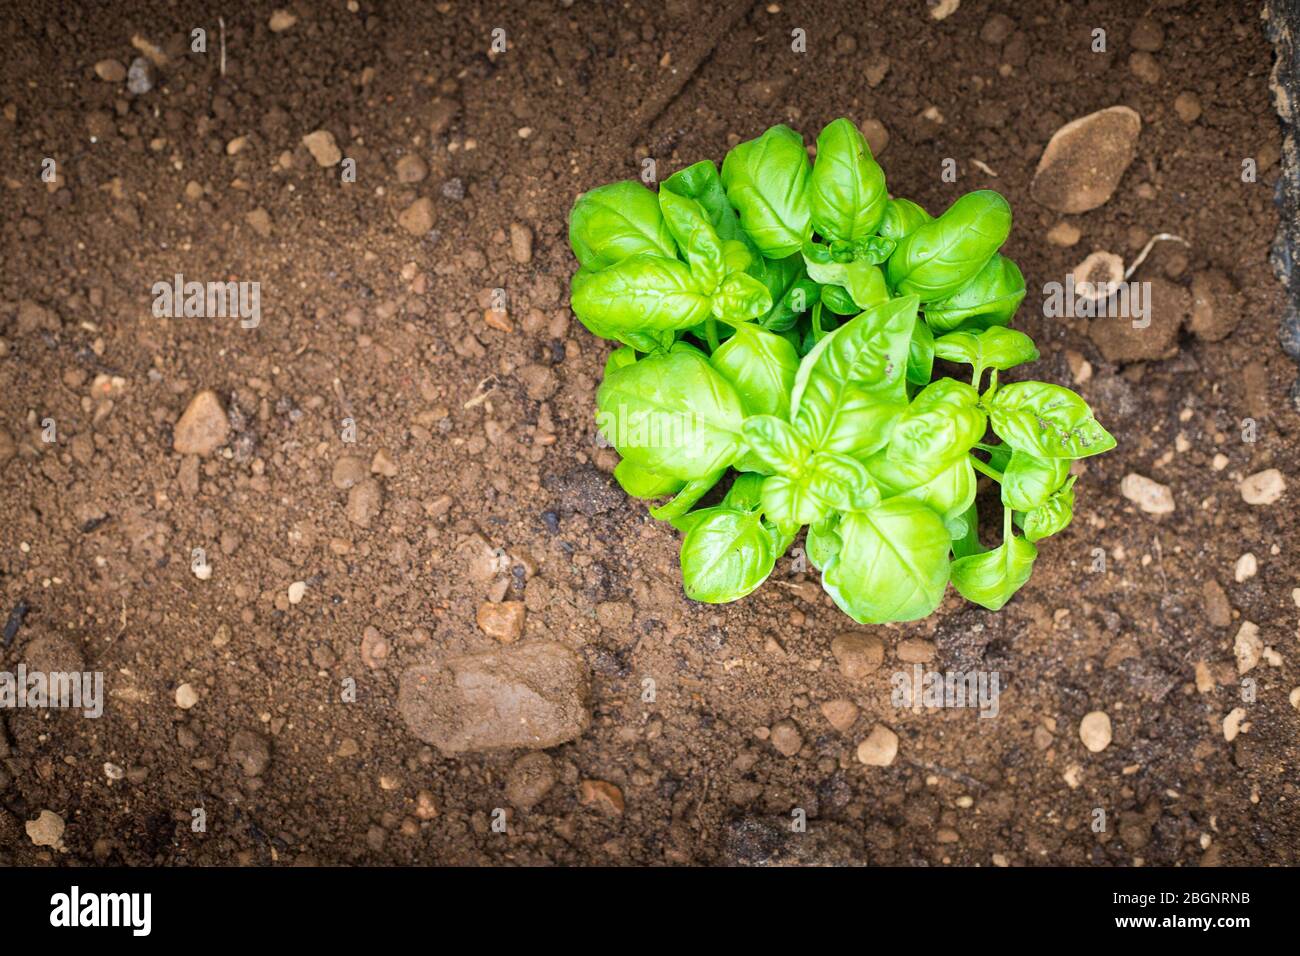 A small basil plant in wet ground, aerial top view. Home-growing vegetables and fruit is a nice activity idea during covid-19 lockdown pandemic. Wallp Stock Photo